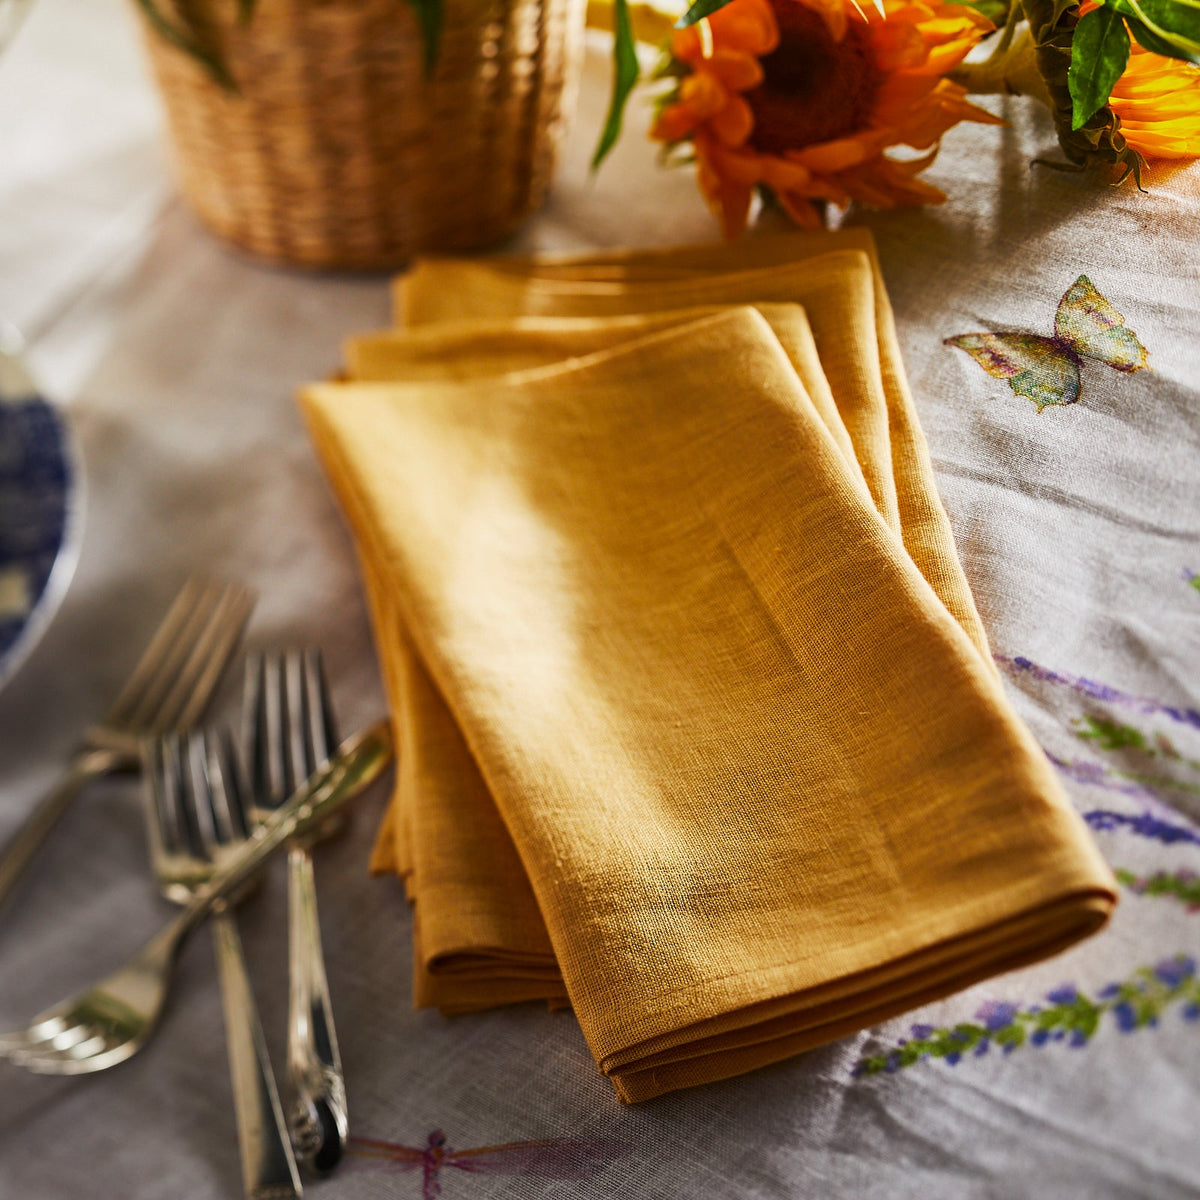 A Marigold Linen Dinner Napkins Set/4 on a table next to a fork and knife. [Brand Name: TTT]